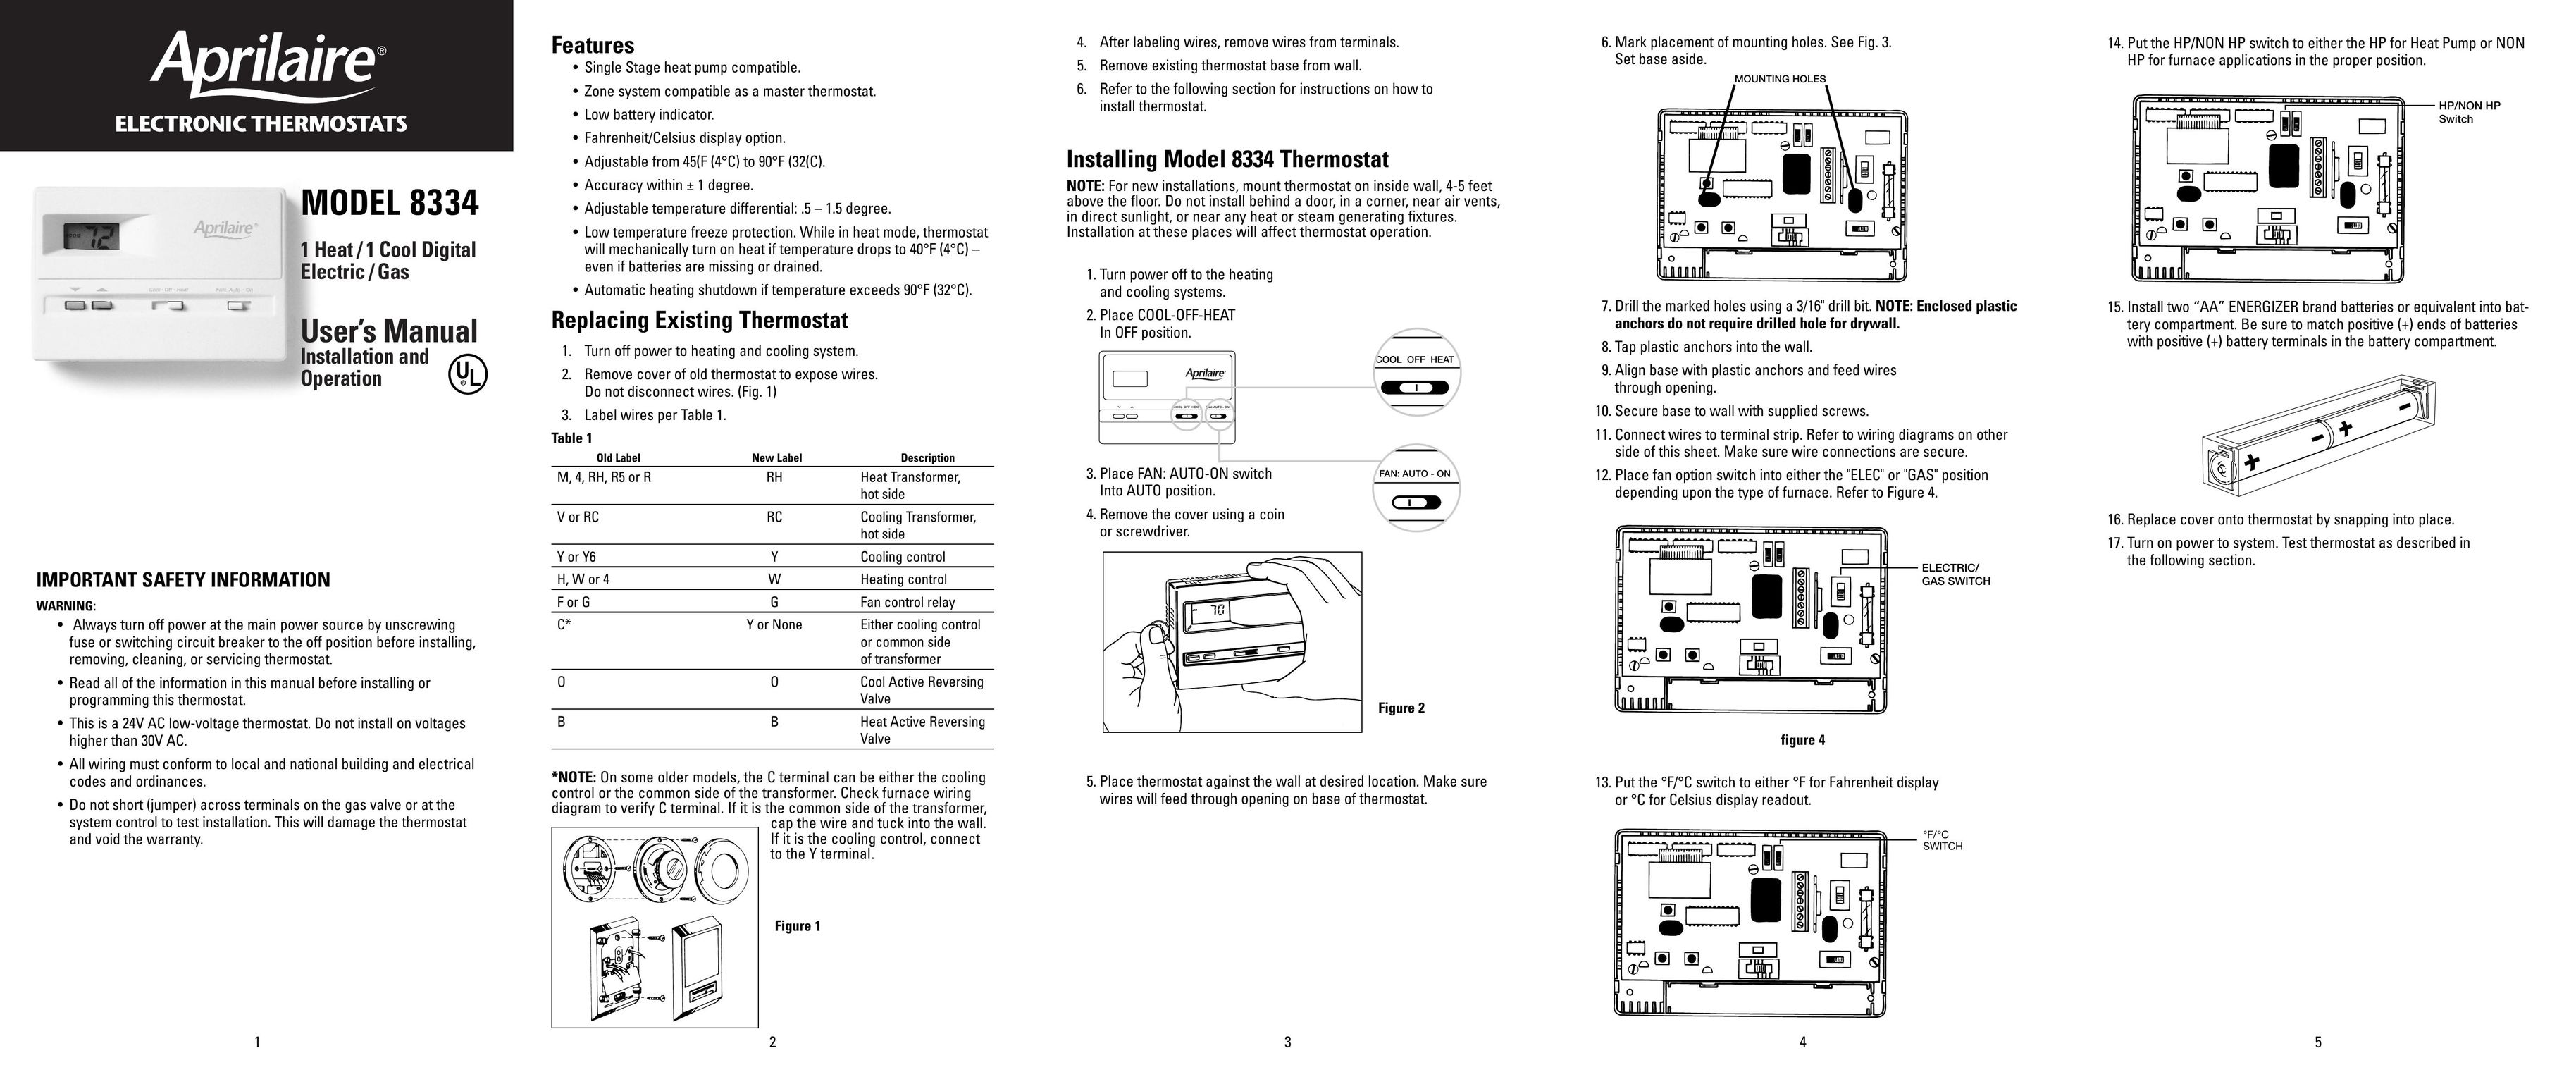 Aprilaire 8334 Thermostat User Manual